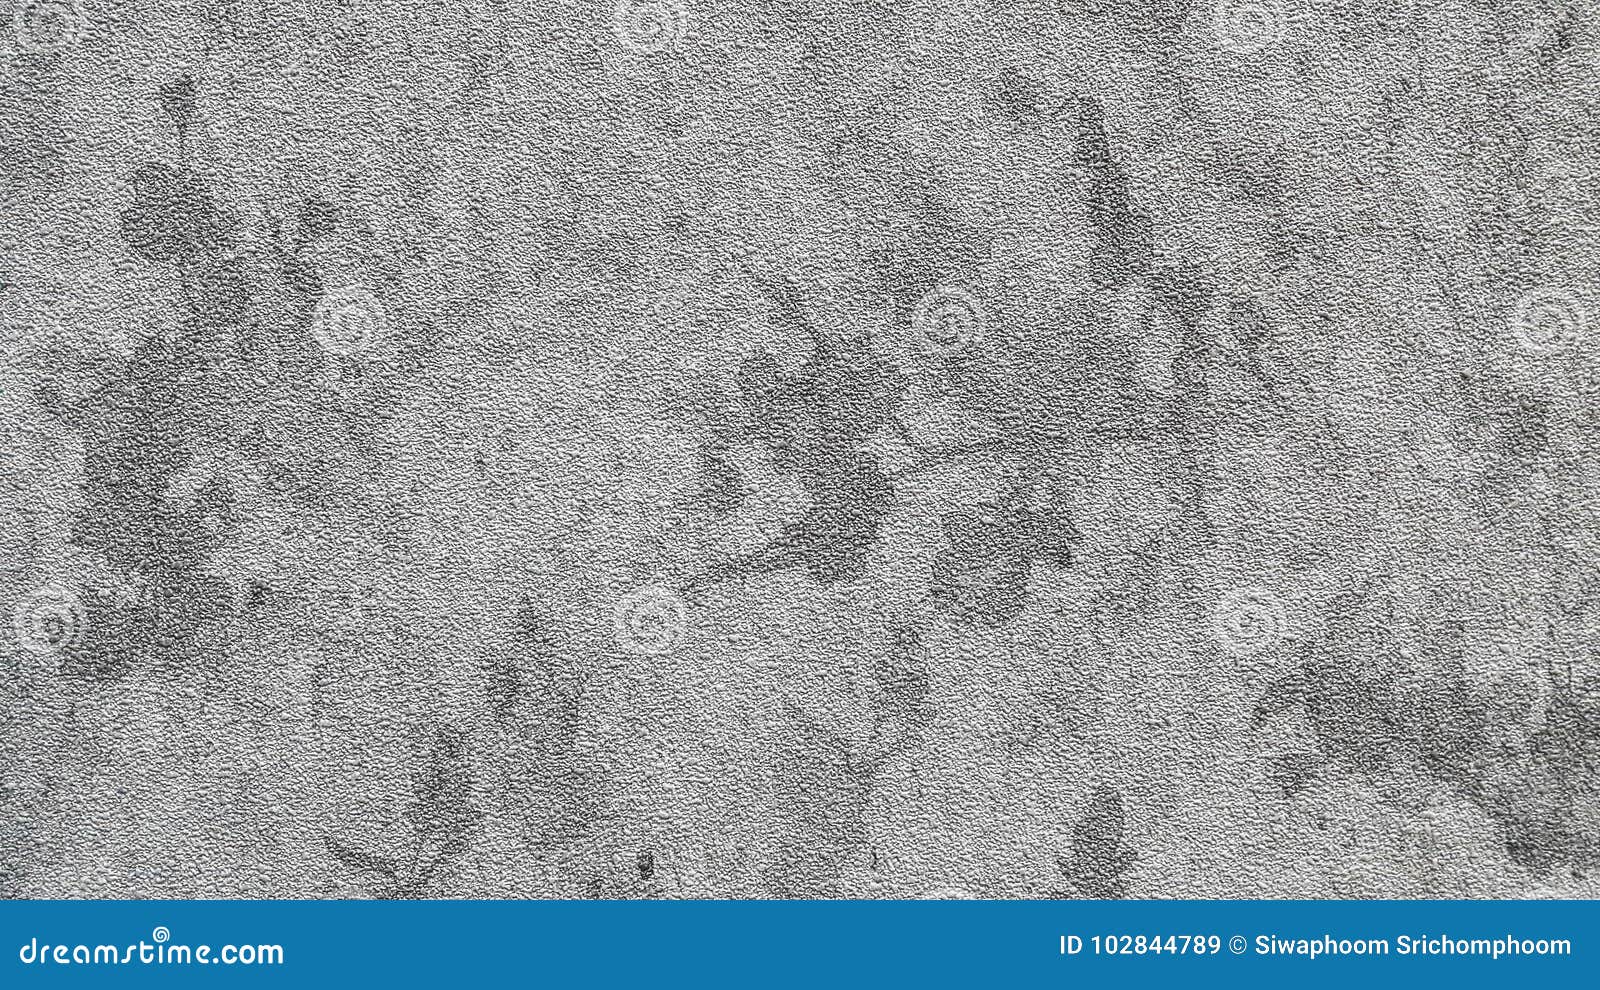 Arts of gray wallpaper stock image. Image of dirty, detail - 102844789